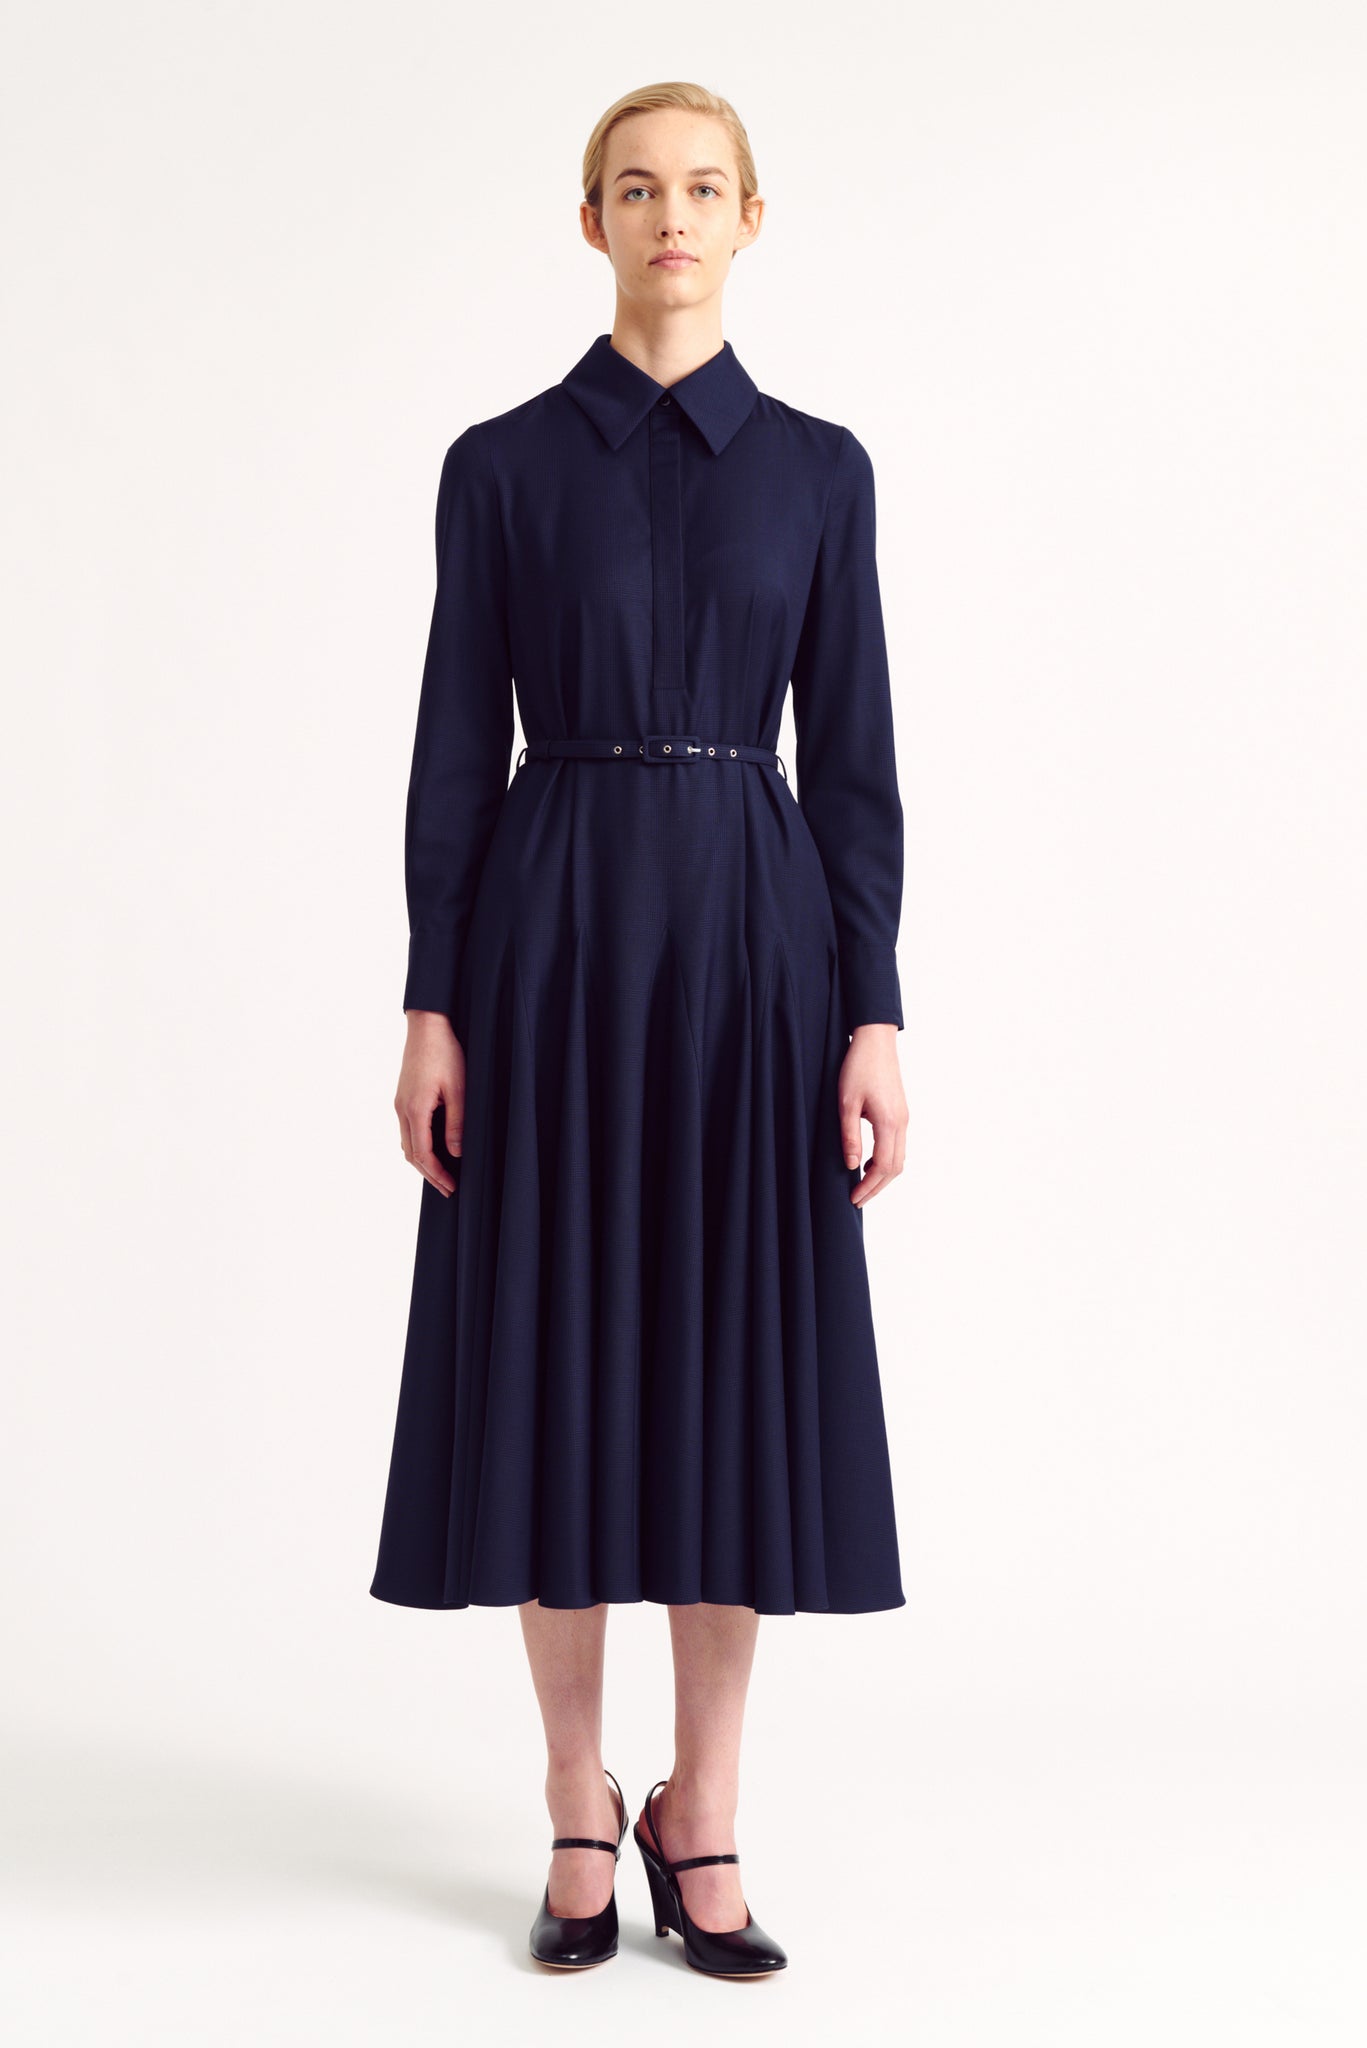 Marione Navy And Black Prince Of Wales Check Dress | Emilia Wickstead